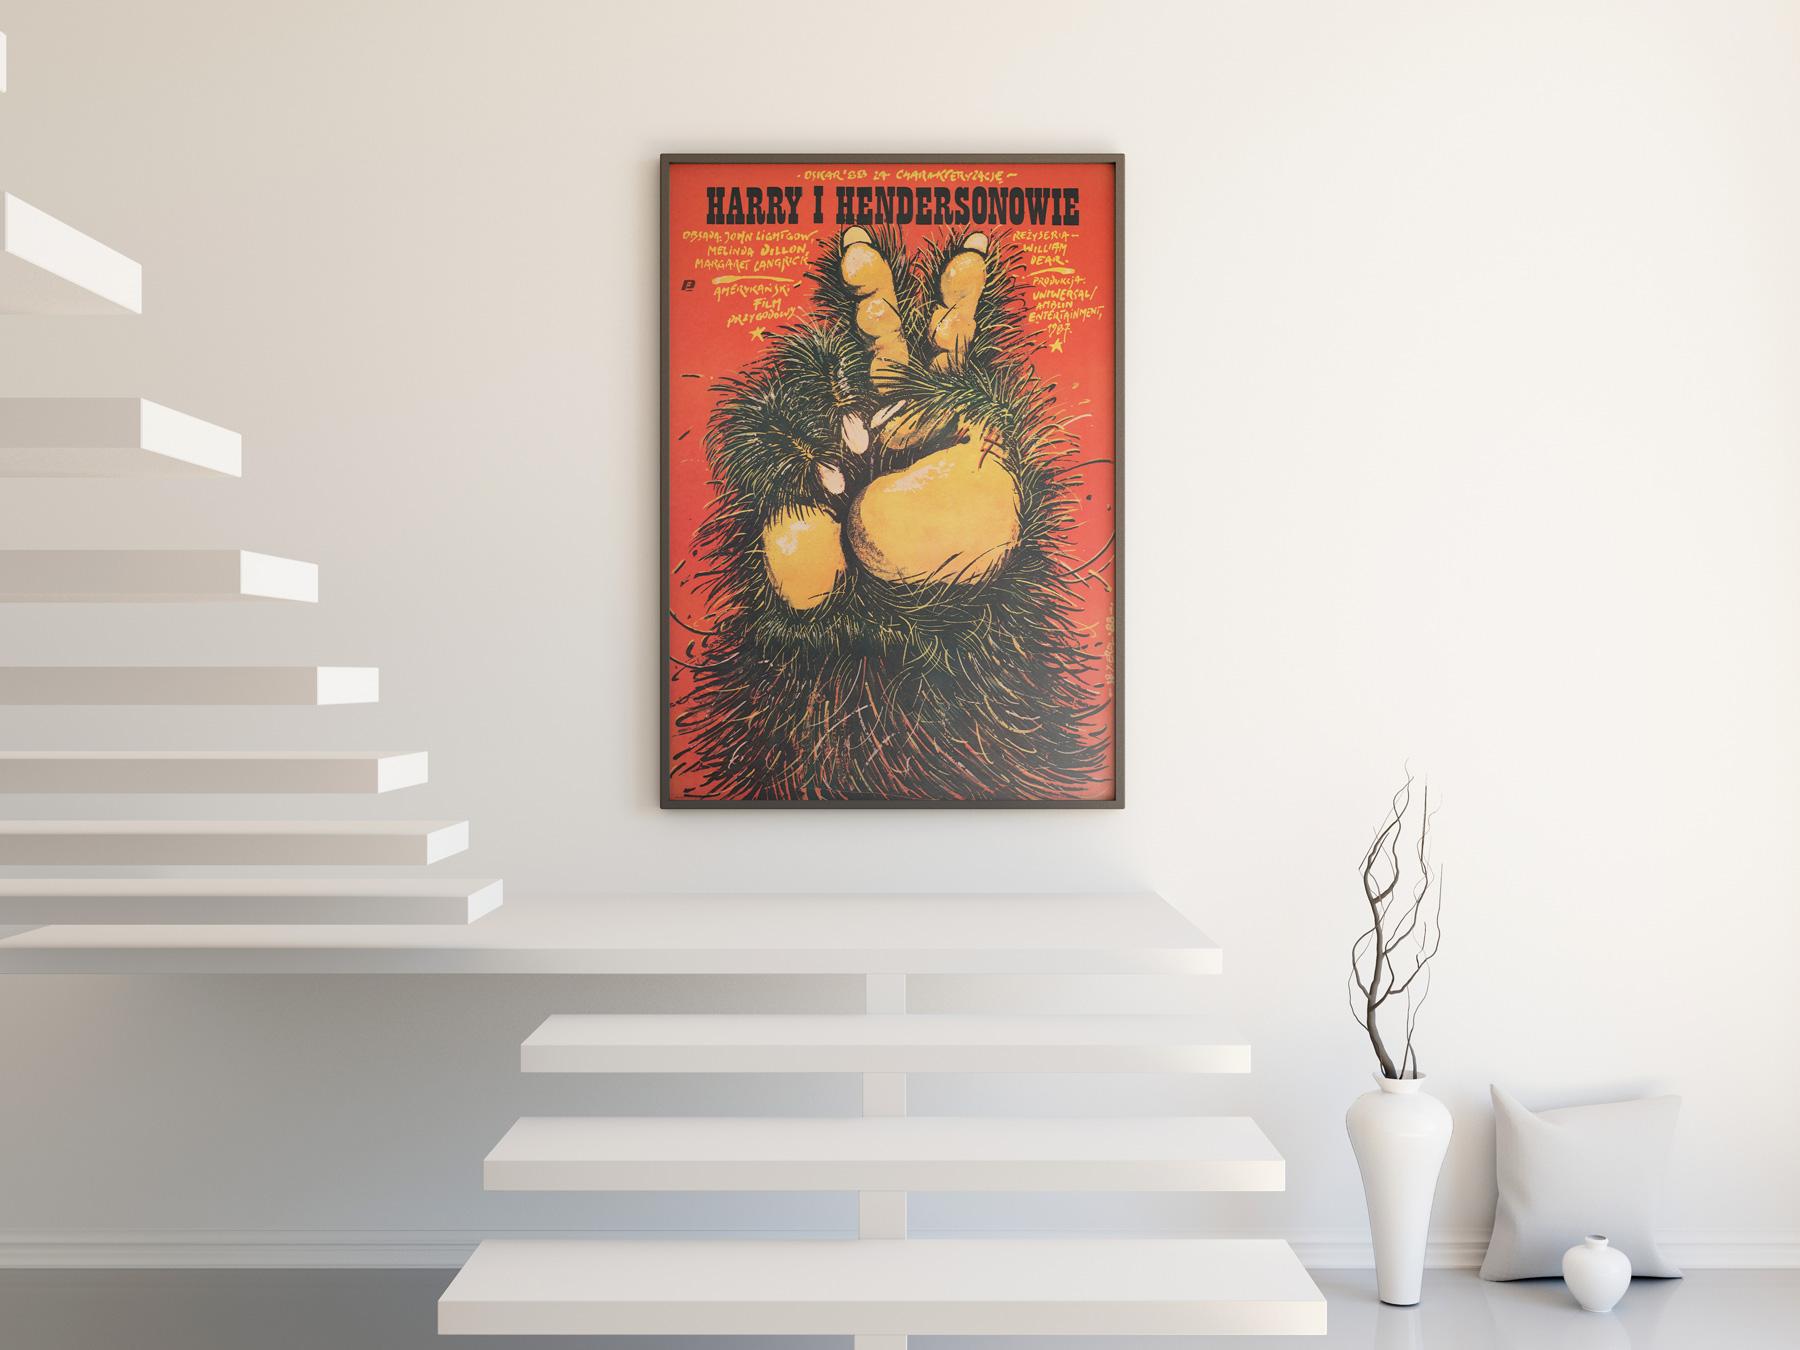 Wonderful bigfoot (or should it be big-hand!) artwork by Jakub Erol for 80s comedy caper Harry and the Hendersons.

The original vintage poster is sized 26 1/4 x 37 7/8. Sent rolled (unframed)